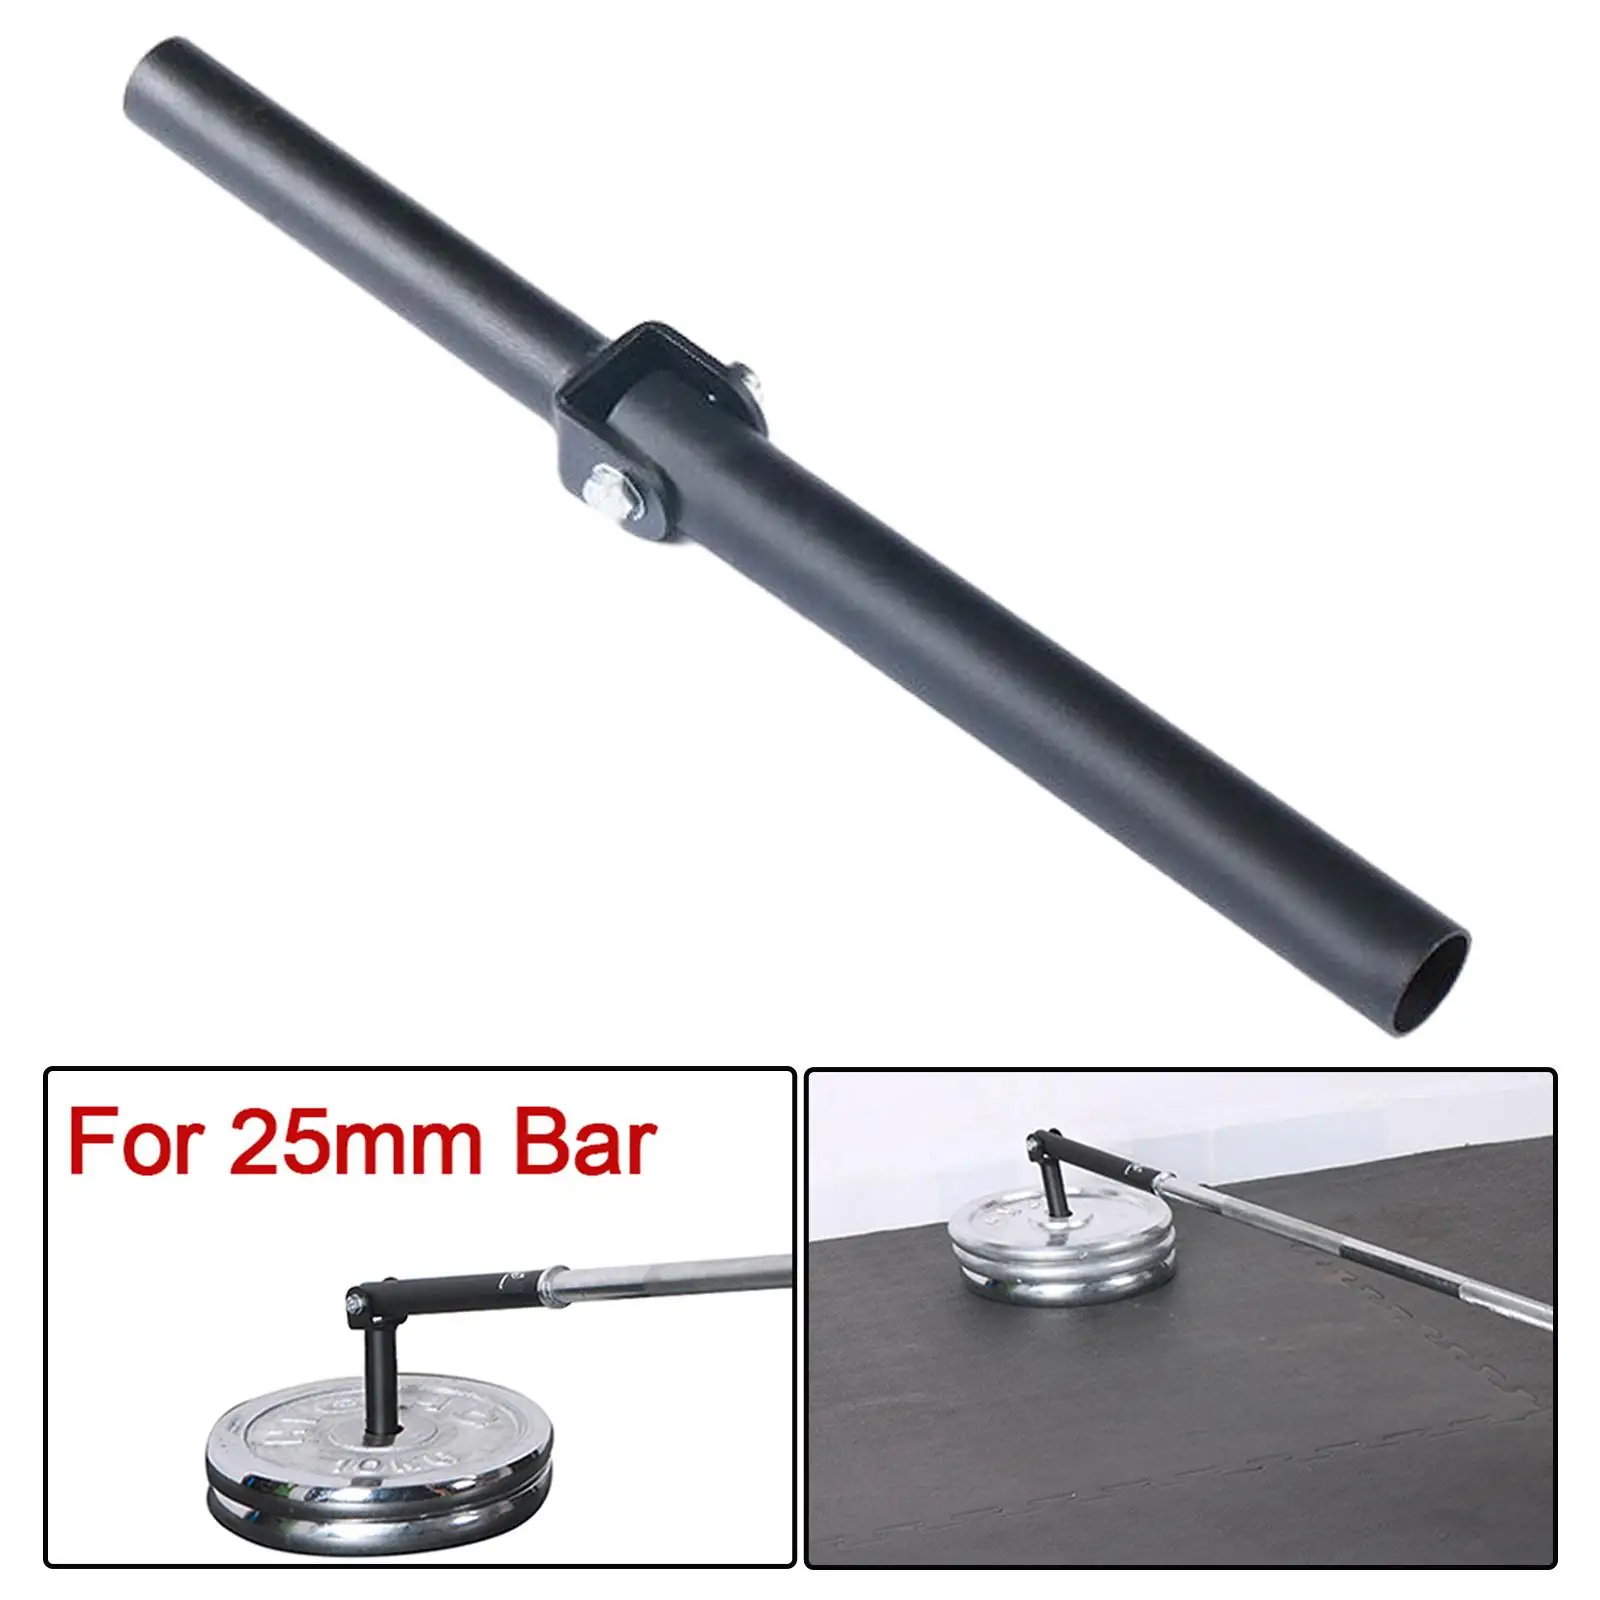 T Bar Row Plate Post Insert Landmine Barbell Attachment Weight Plate Holders Multifunctional Full 360 Swivel for Gym Exercises